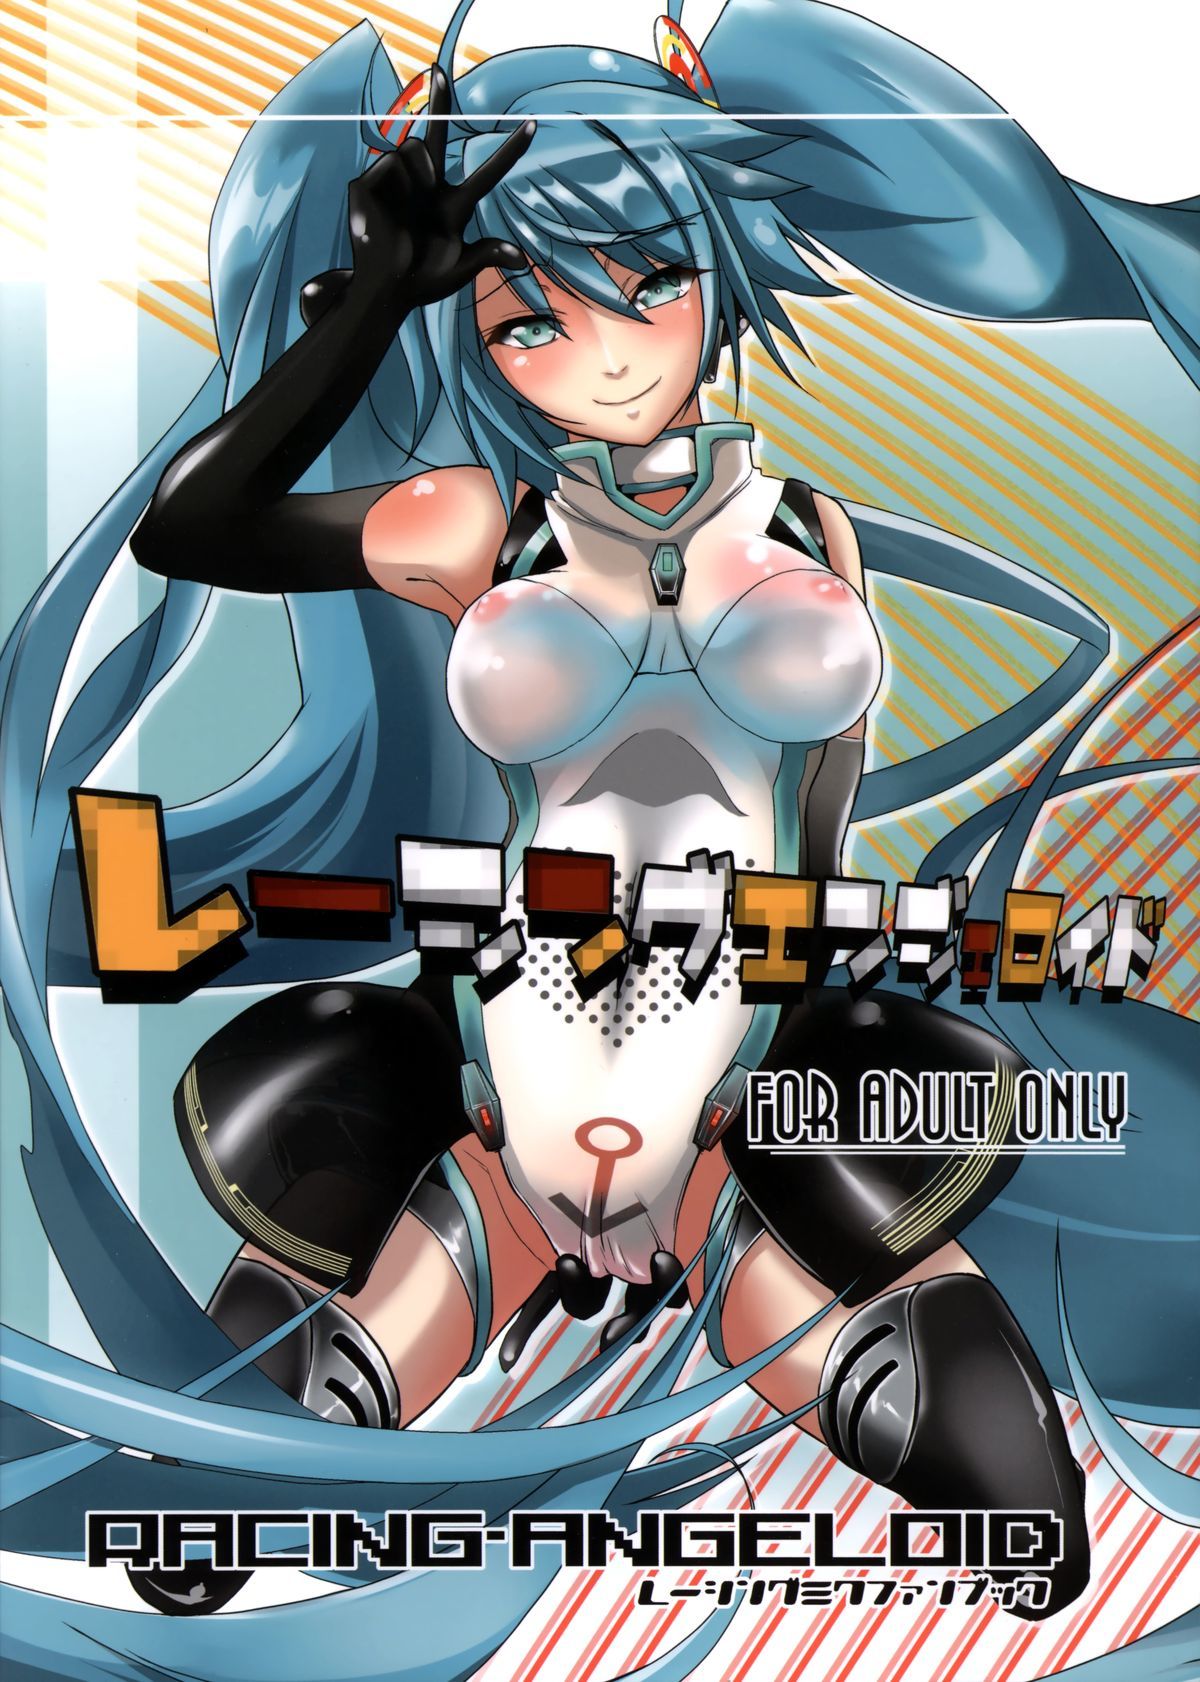 Miku Hentai Anal - Hatsune Miku - sorted by number of objects - Free Hentai